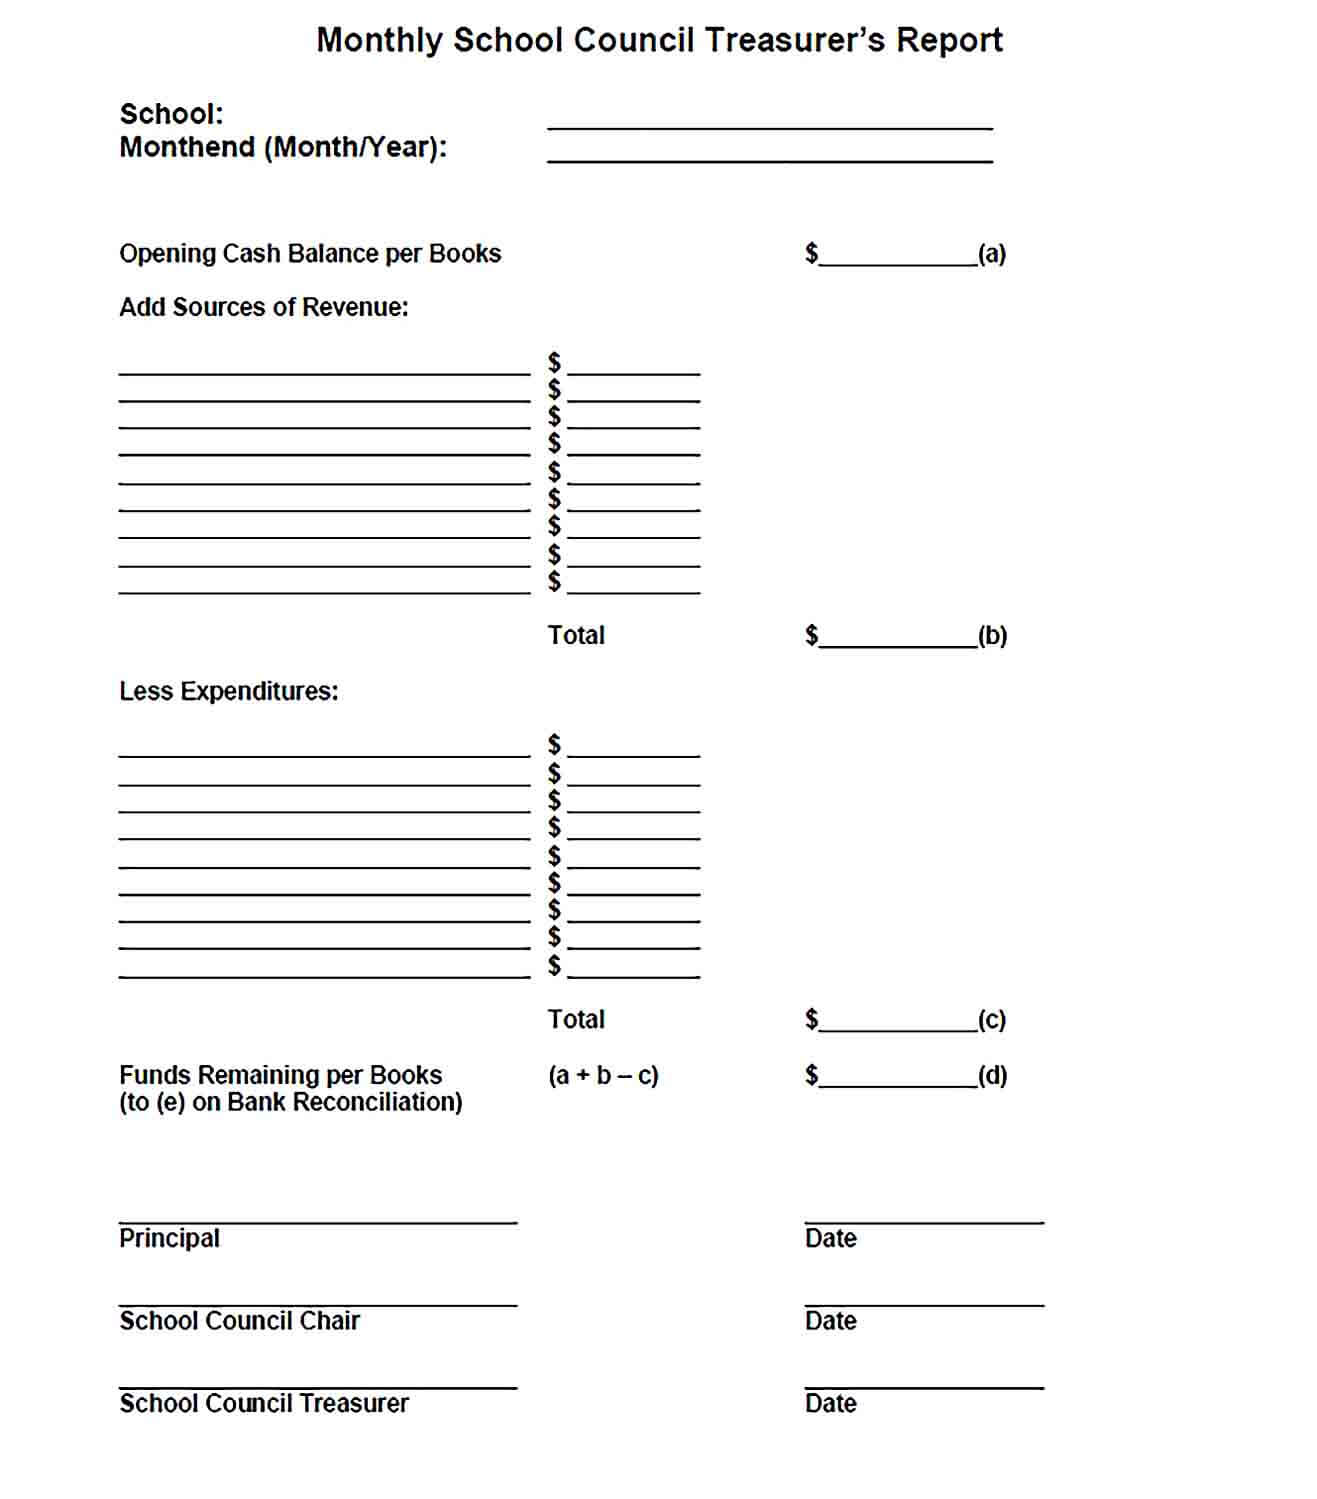 Sample Monthly School Council Treasurers Report PDF Template